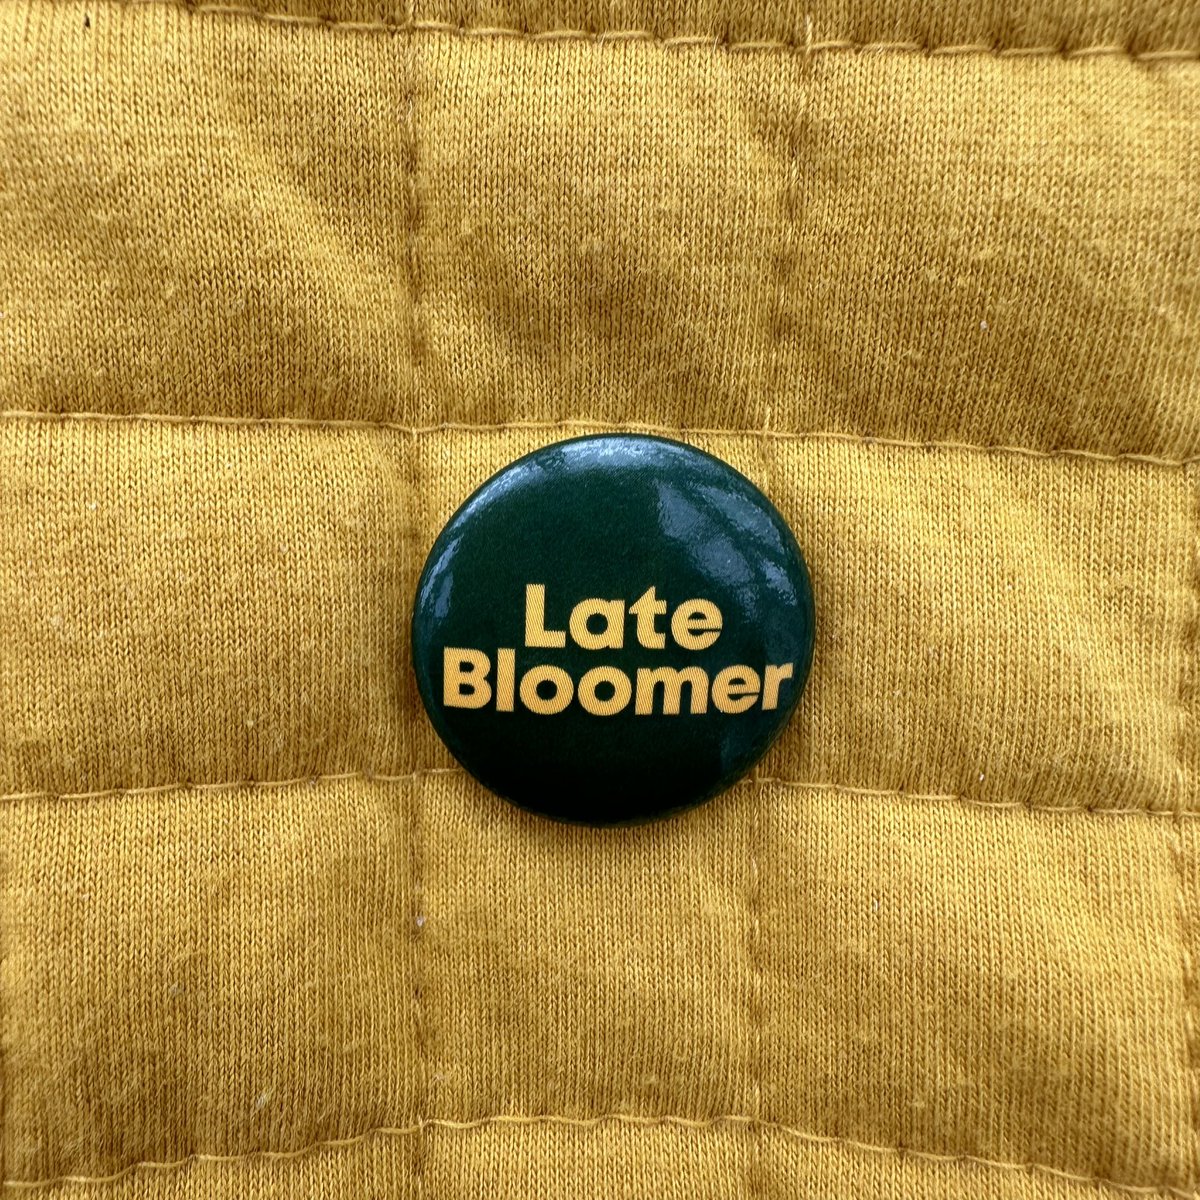 Thank you to everyone who has been to see Late Bloomer so far. I’m 118 shows in and loving it. Up next is another 100 shows in the UK, Ireland and other parts of Europe. Then next year is Australia, New Zealand, Canada, USA and some more parts of Europe. (Join my mailing list via